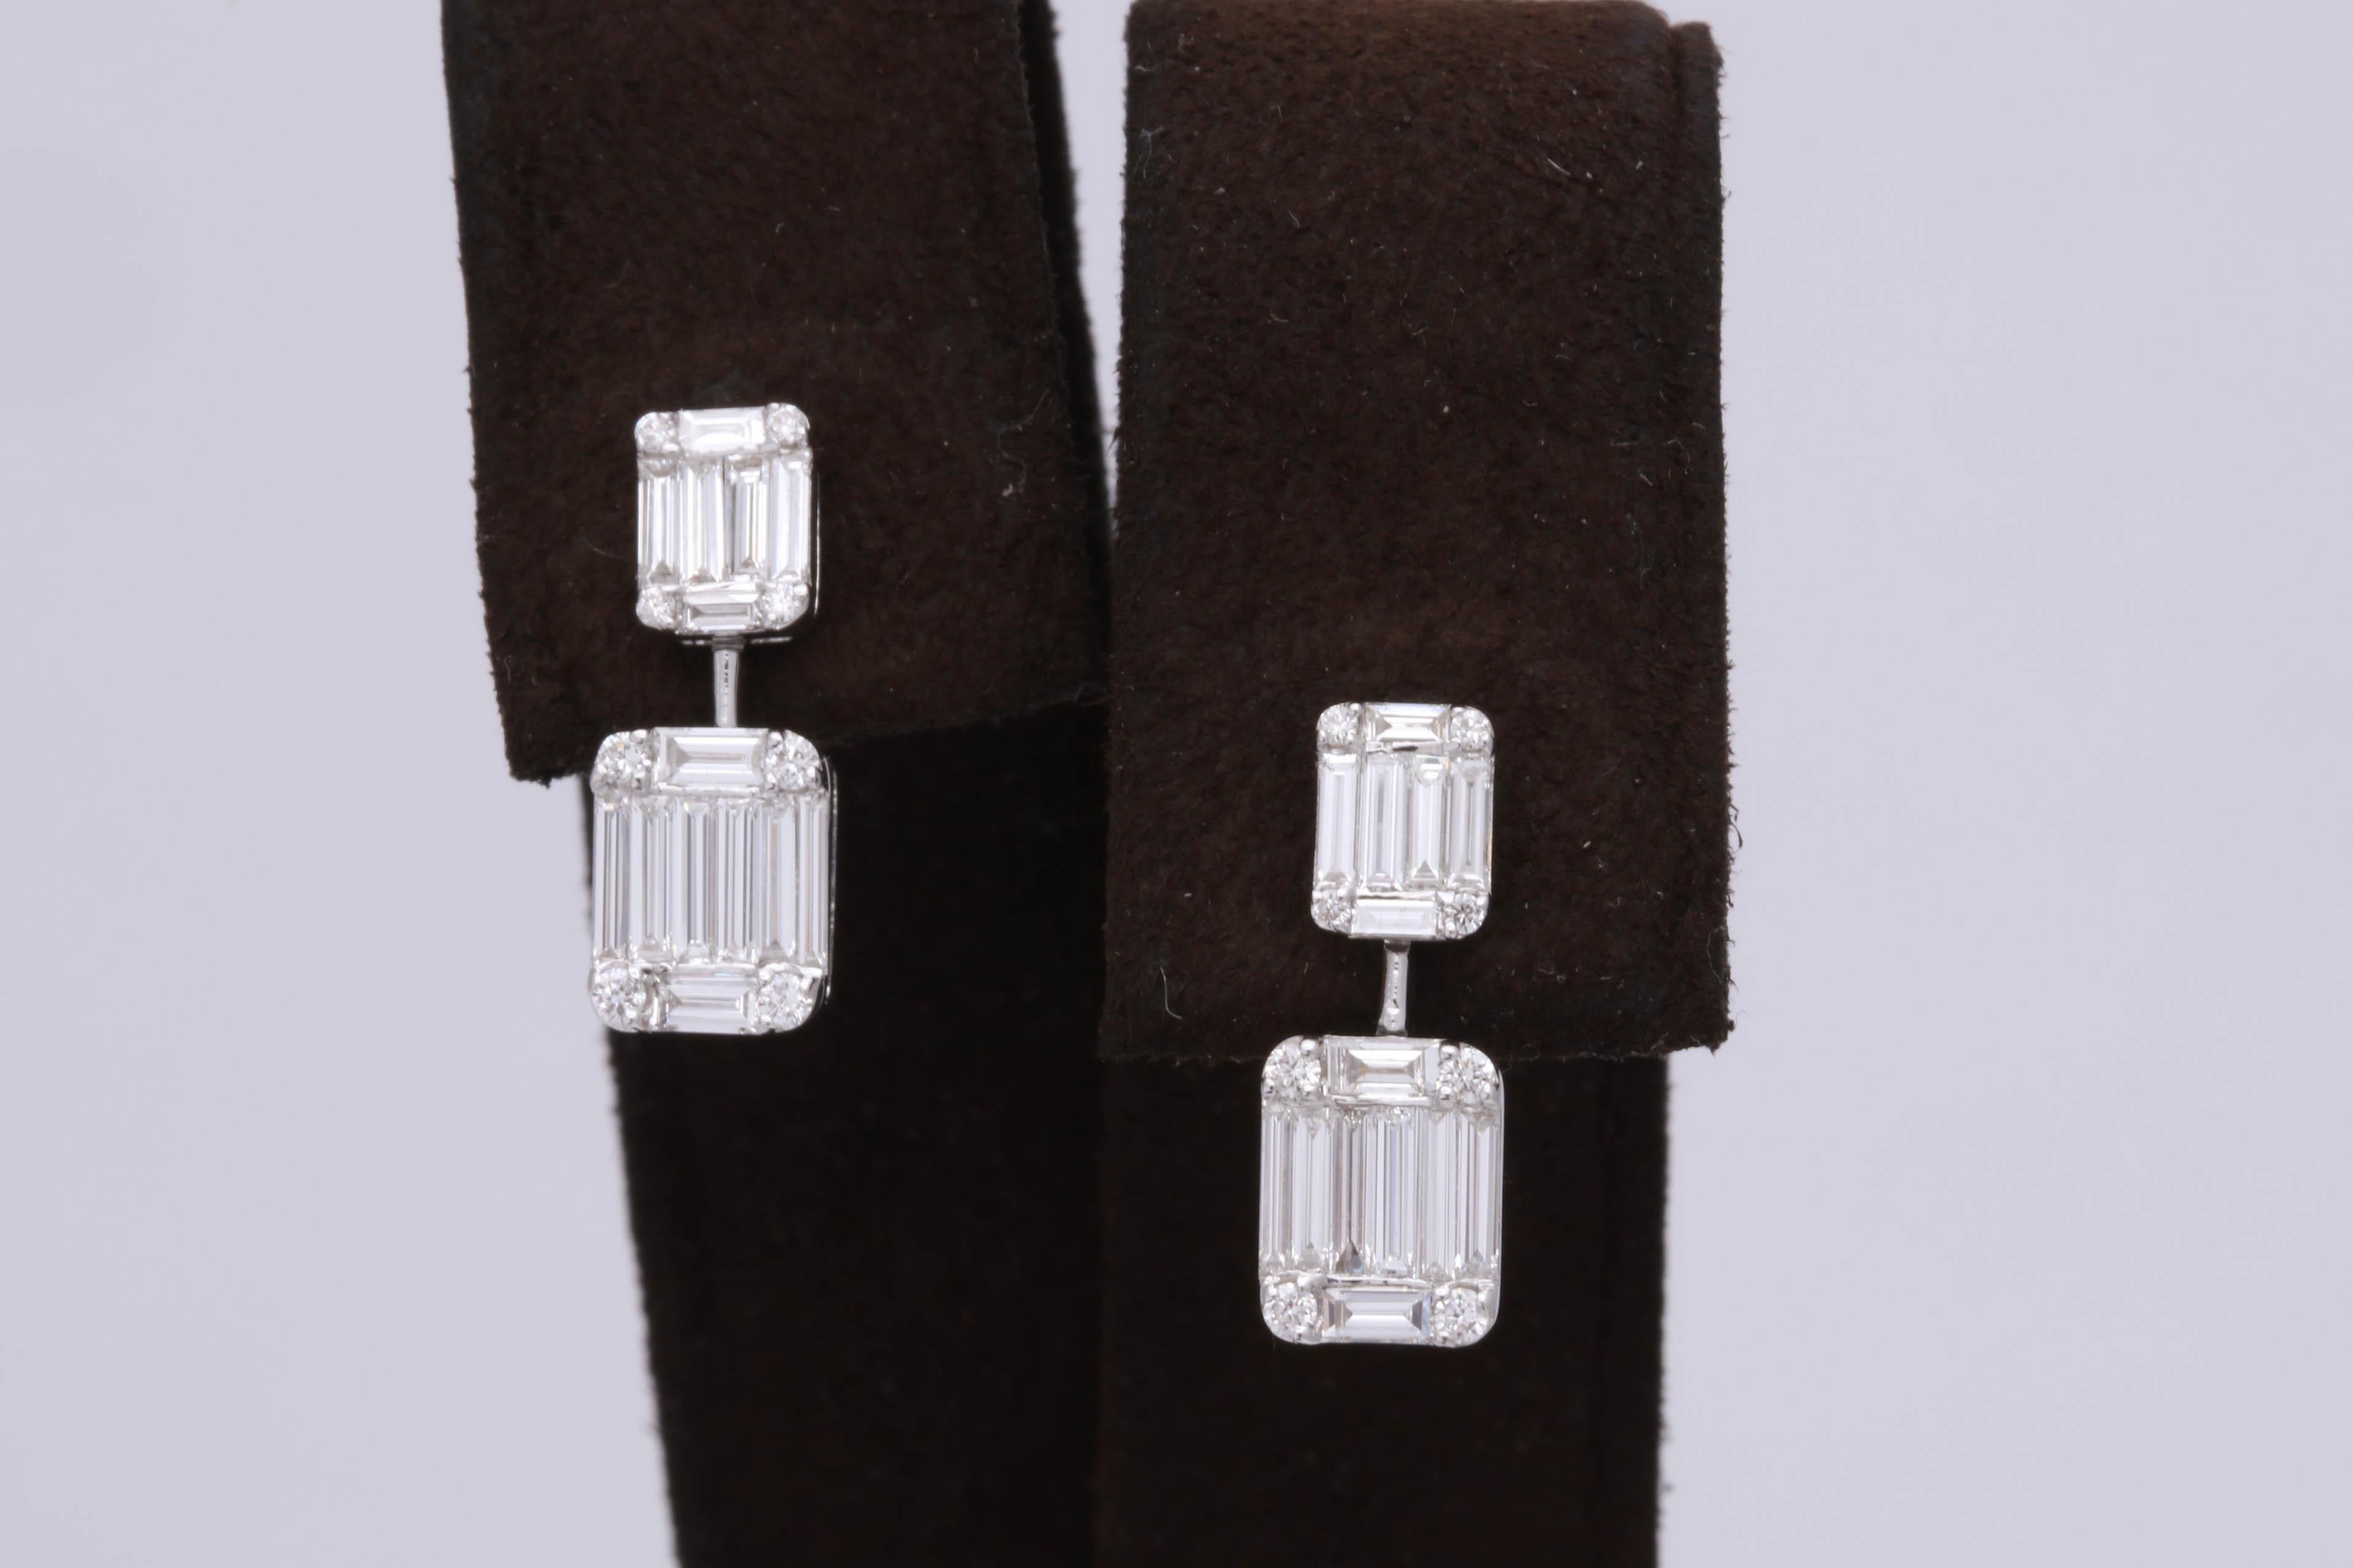 
An AMAZING earring!

1.42 carats of round and special cut F color VS clarity diamonds give an illusion Emerald cut diamond look.  Set in 18k white gold.

The combination of the different cuts give these earrings a special sparkle.

A wonderful gift